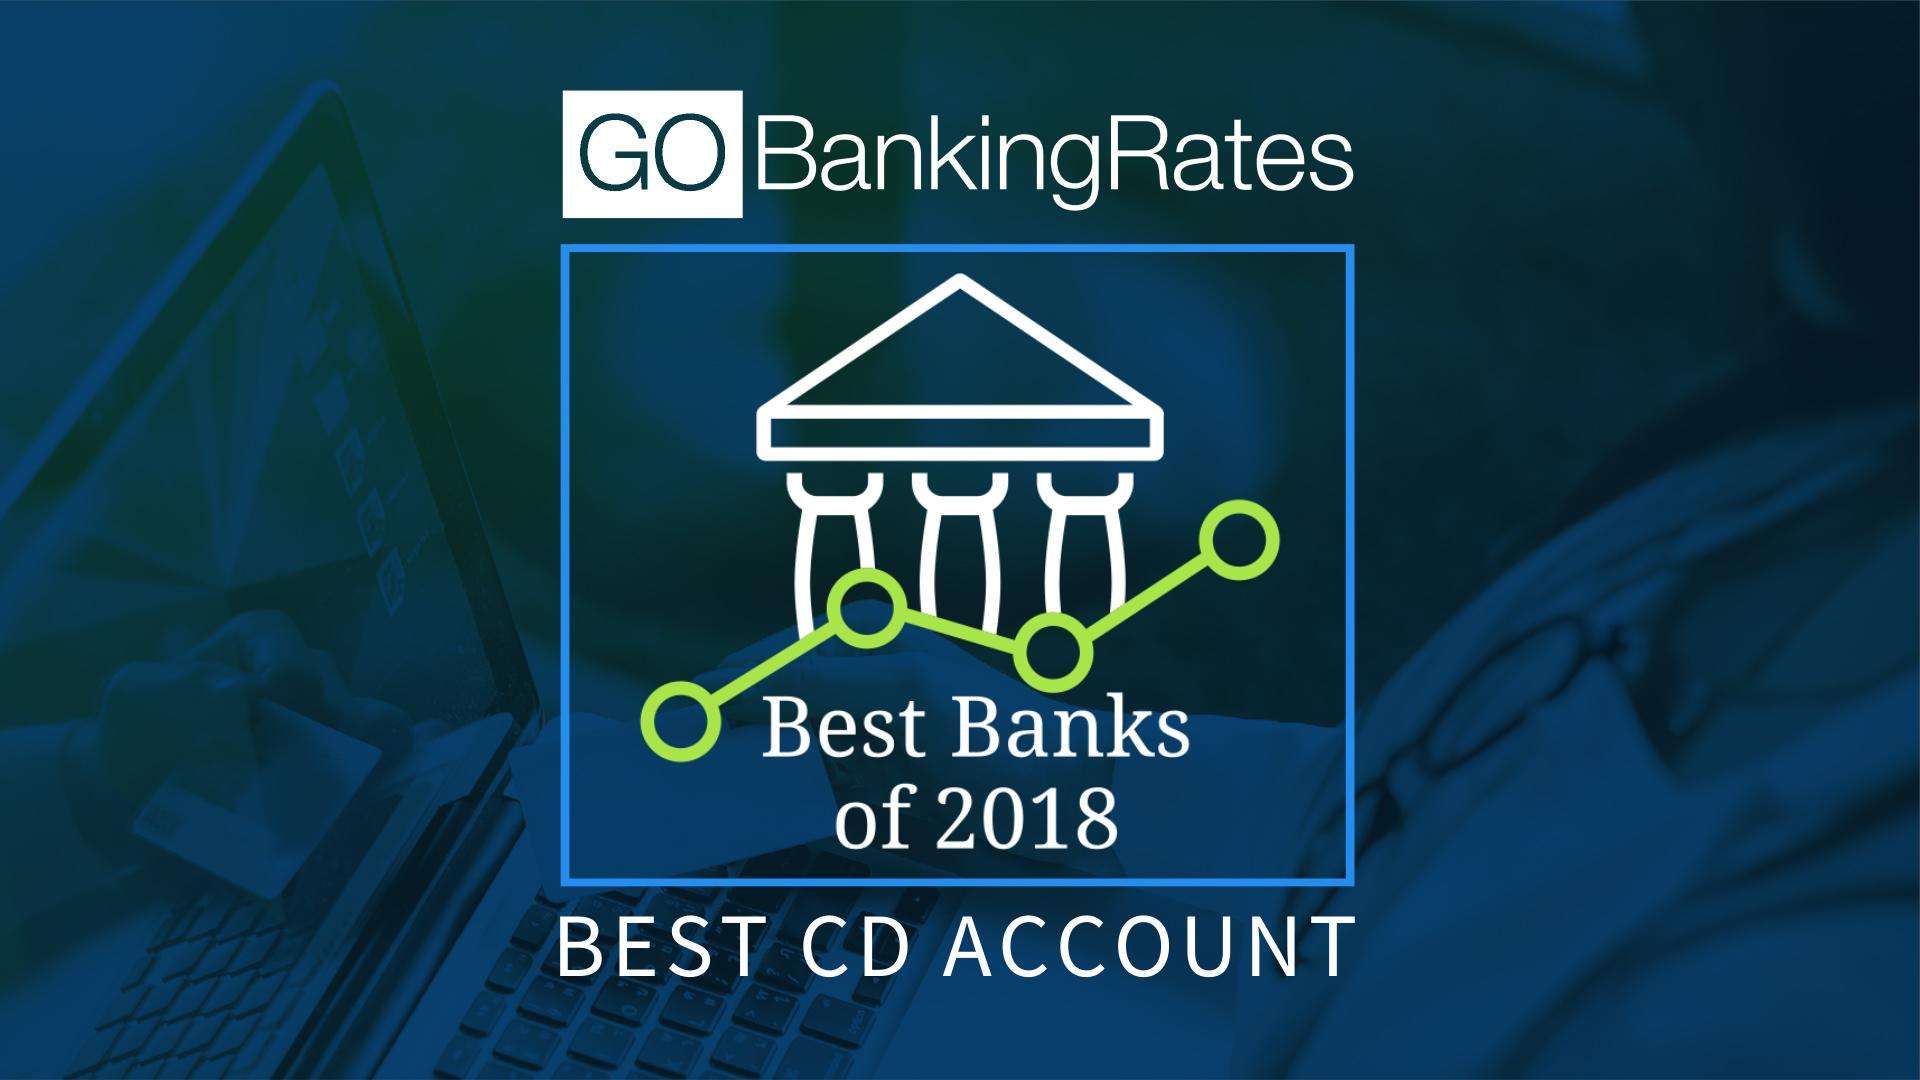 Best CD Account of 2018: Marcus by Goldman Sachs